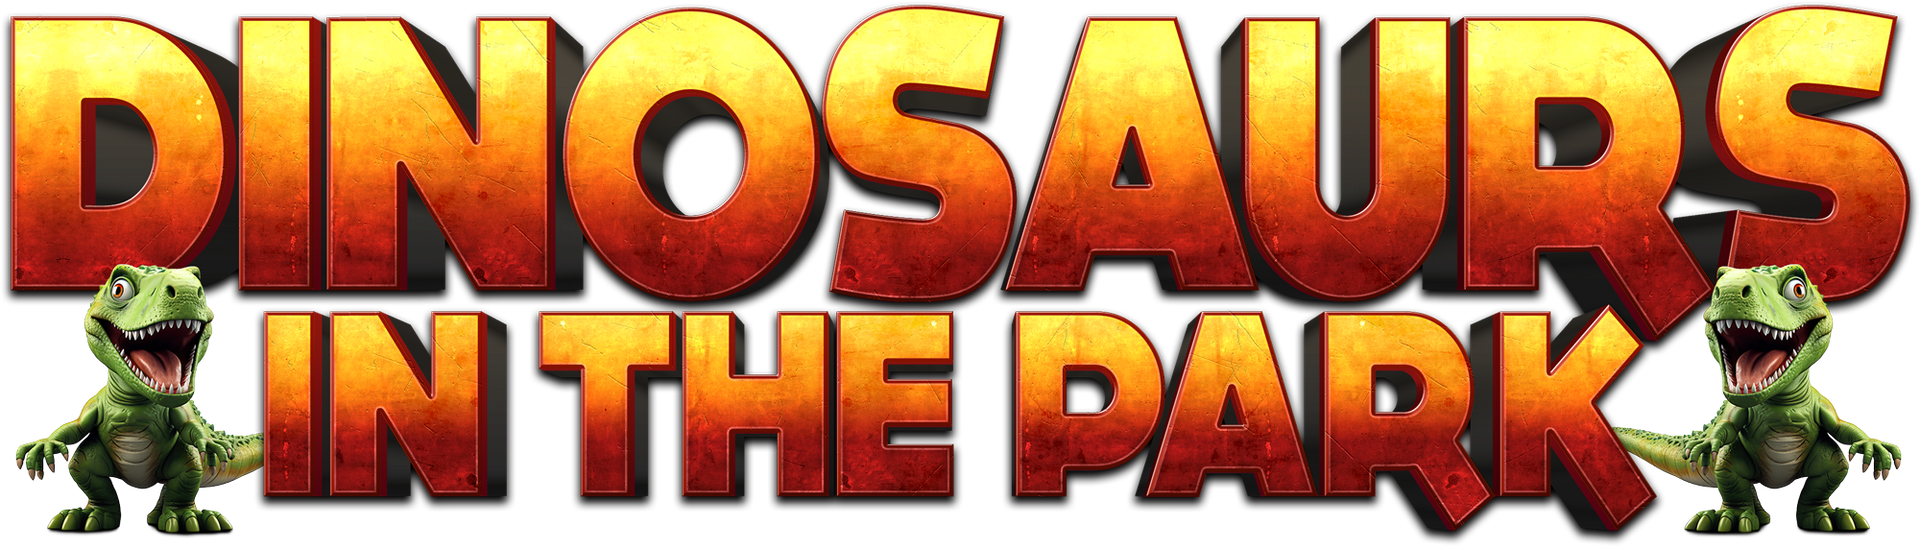 Dinosaurs in the Park logo